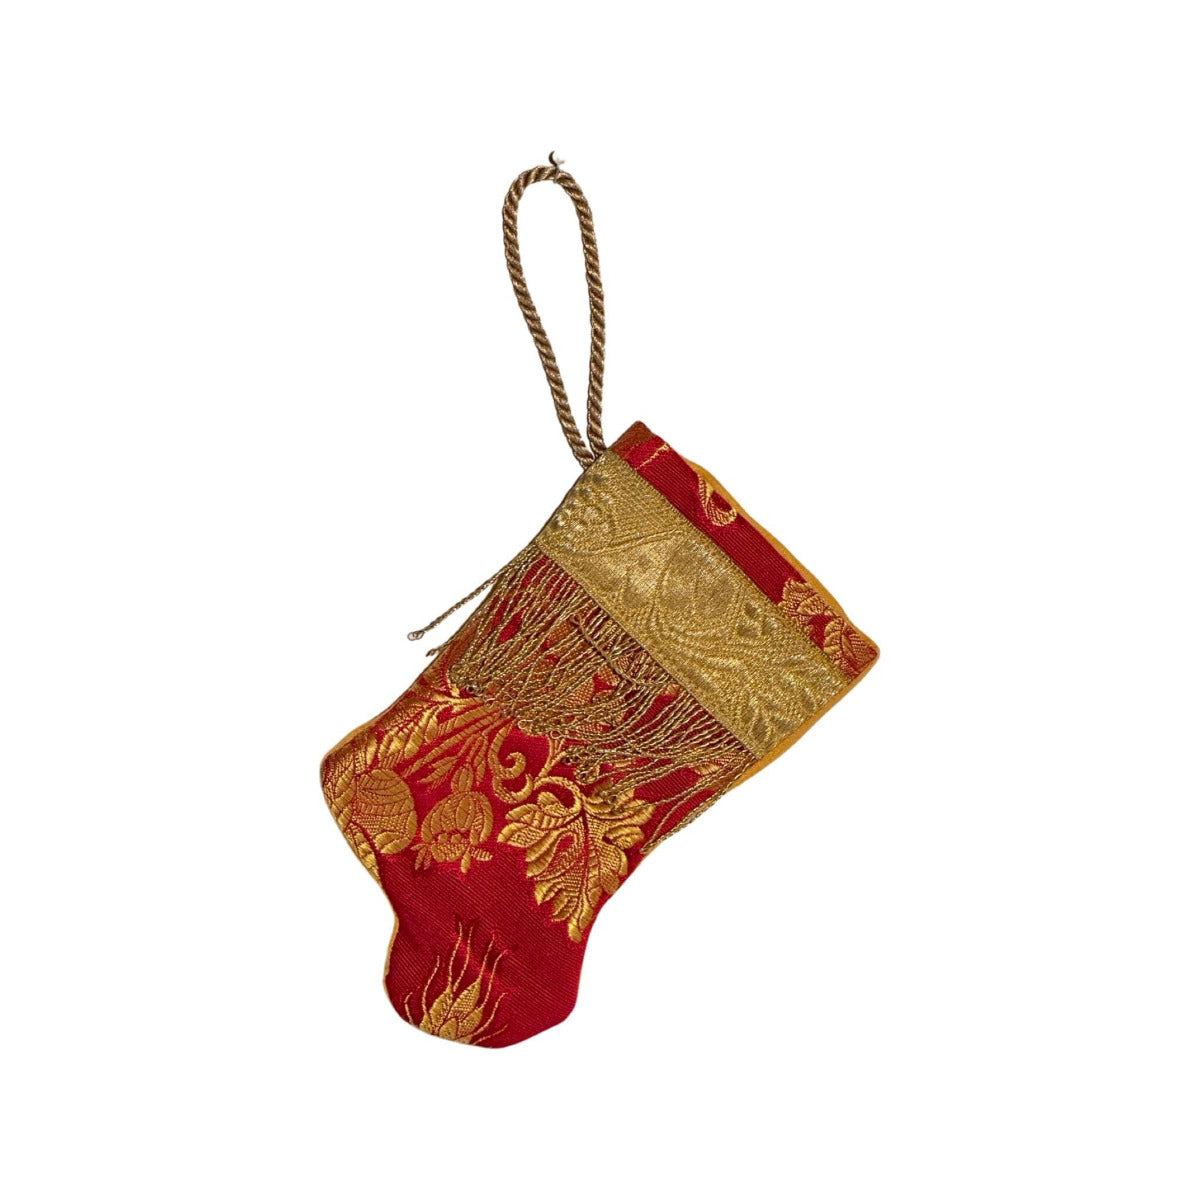 Handmade Mini Stocking from Antique Textiles - Red / Burgundy, Gold